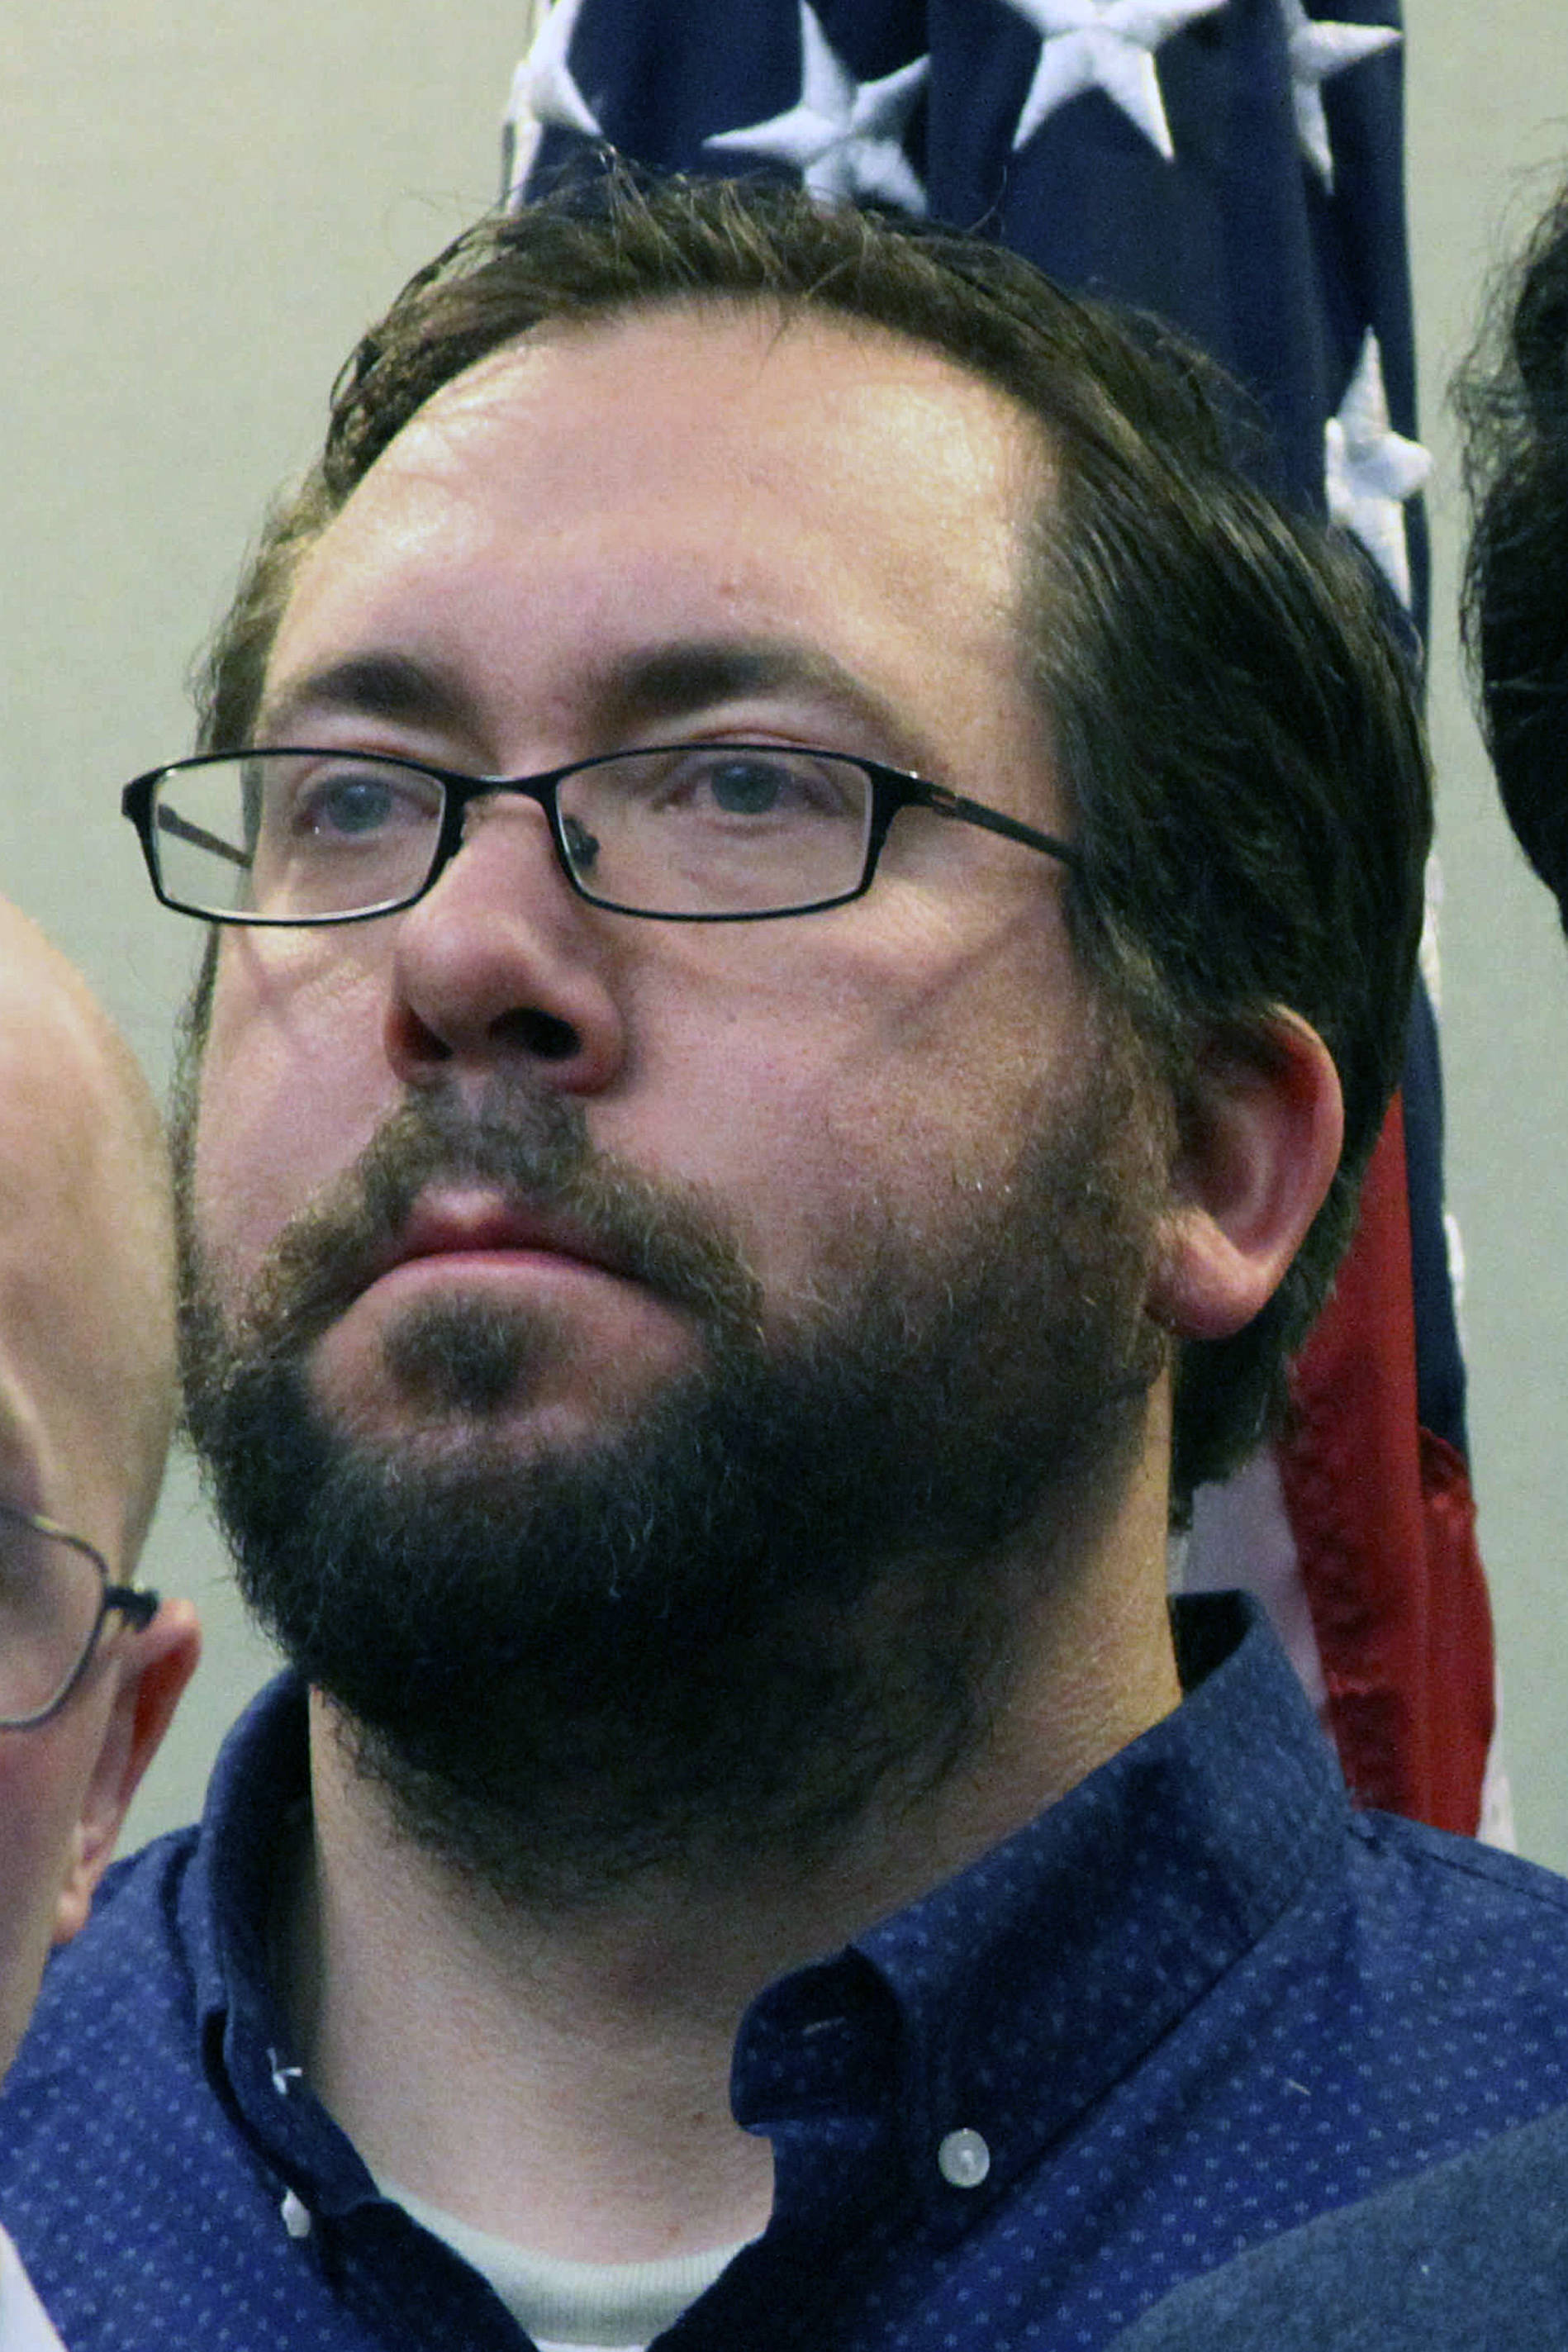 This Nov. 9, 2016 photo shows state Rep. Zach Fansler during a House news conference in Anchorage after the 2016 general election. (AP Photo/Mark Thiessen, File)